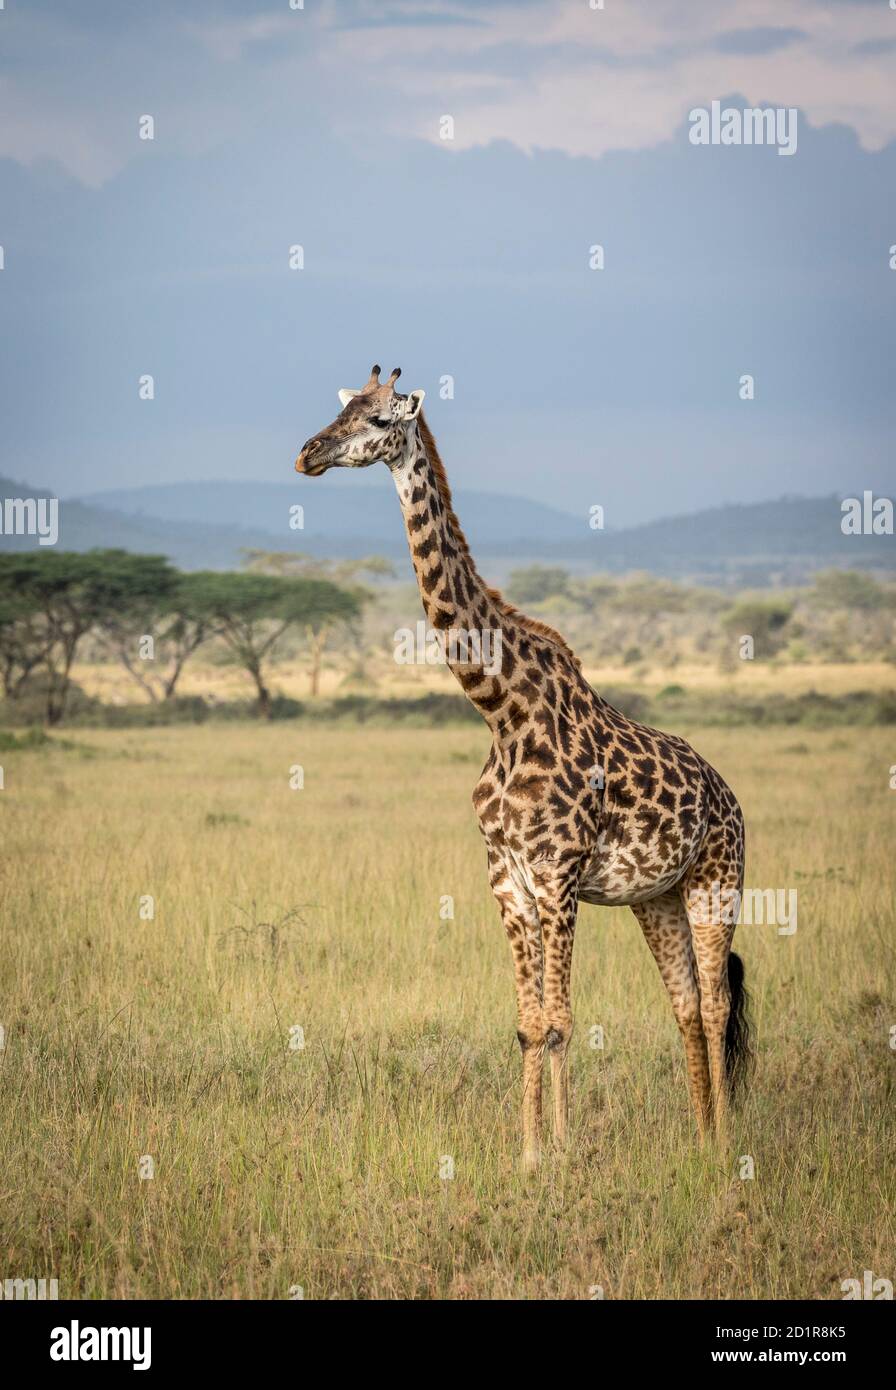 Vertical portrait of an adult giraffe standing in the plains of Serengeti National Park in Tanzania Stock Photo